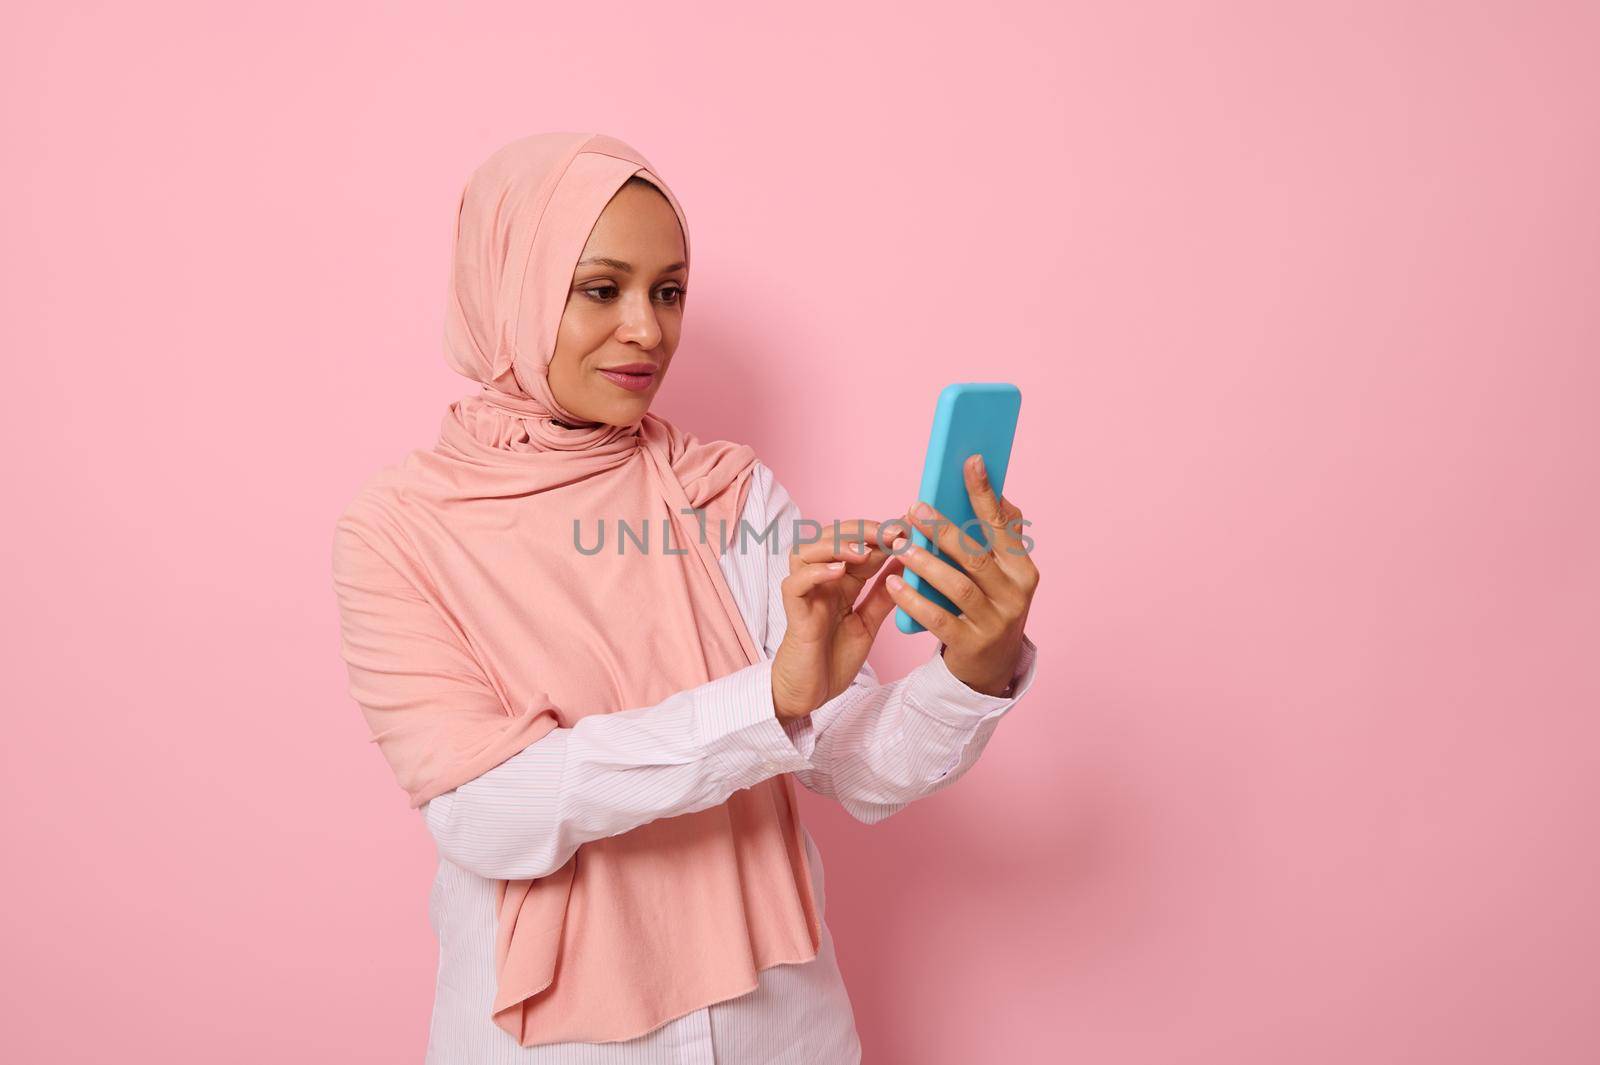 Isolated portrait of confident Arab Muslim mature pretty woman in strict religious outfit and covered head in pink hijab texting message on a mobile phone in her hands, colored background, copy space